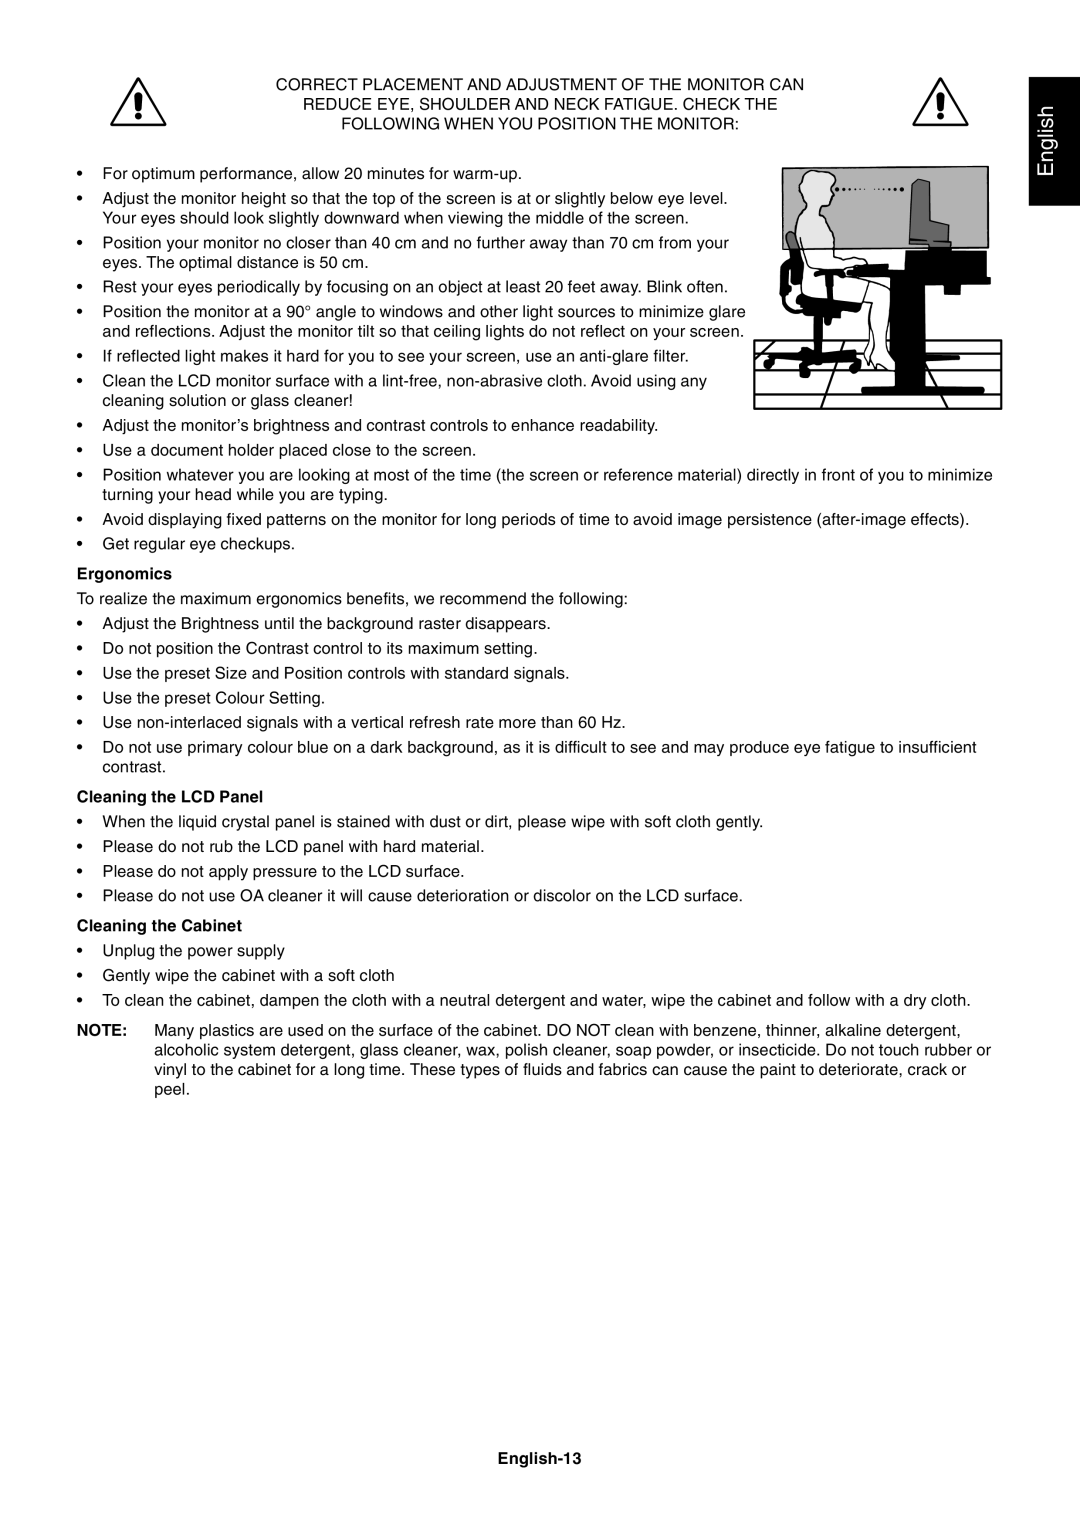 NEC LCD1990FXp user manual Ergonomics, Cleaning the LCD Panel, Cleaning the Cabinet, English-13 